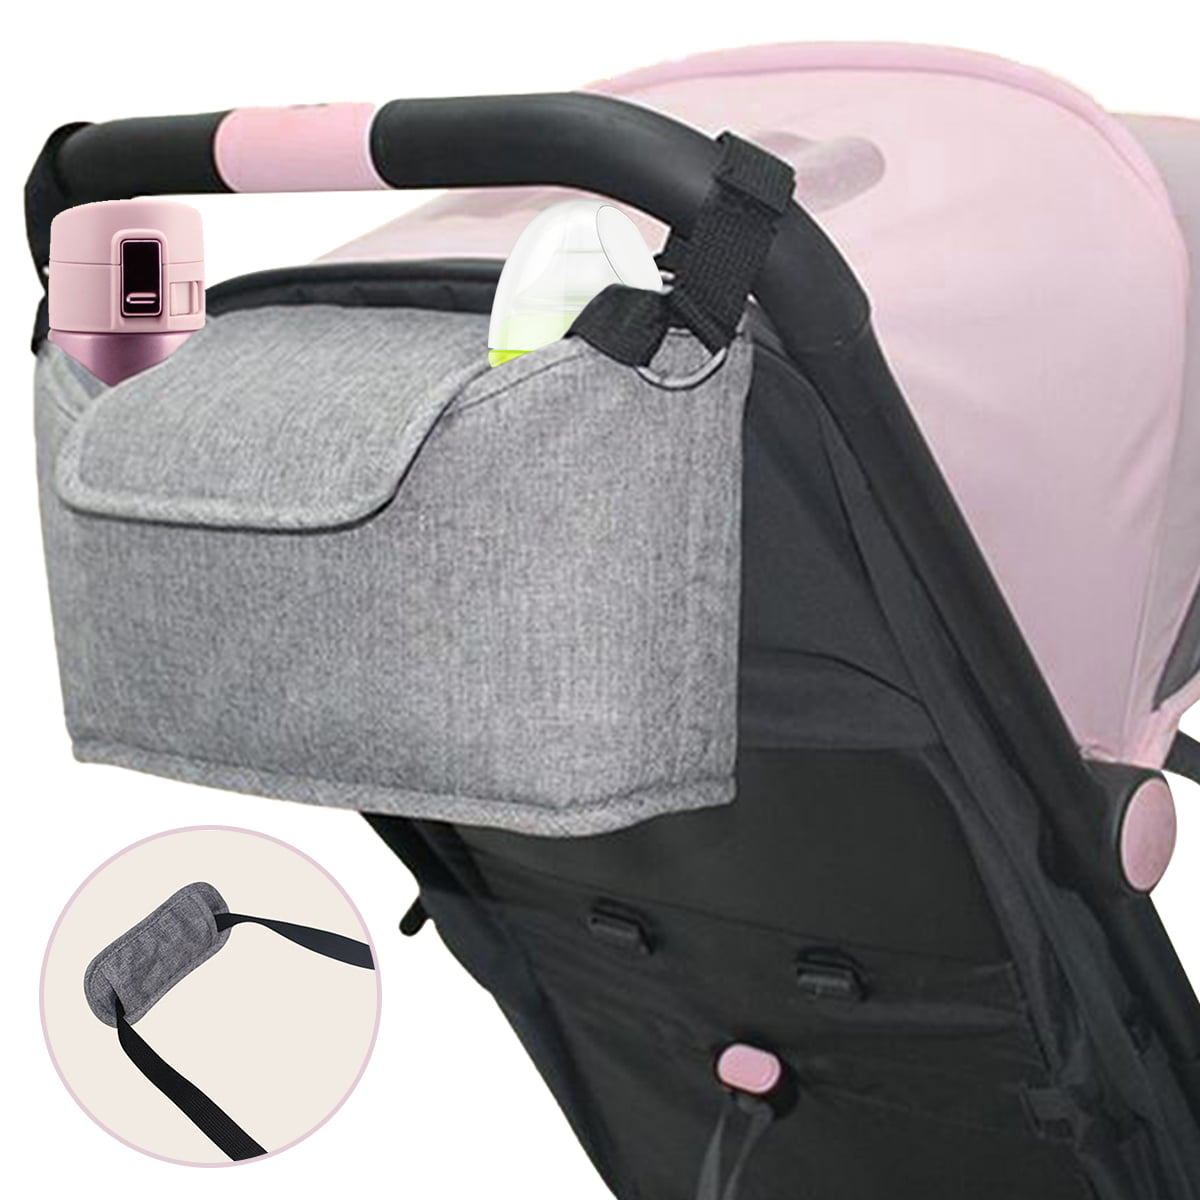 NEW Cup Holder Organizer Bag to fit JOOVY  strollers Wipes Pink Blue Grey Black 